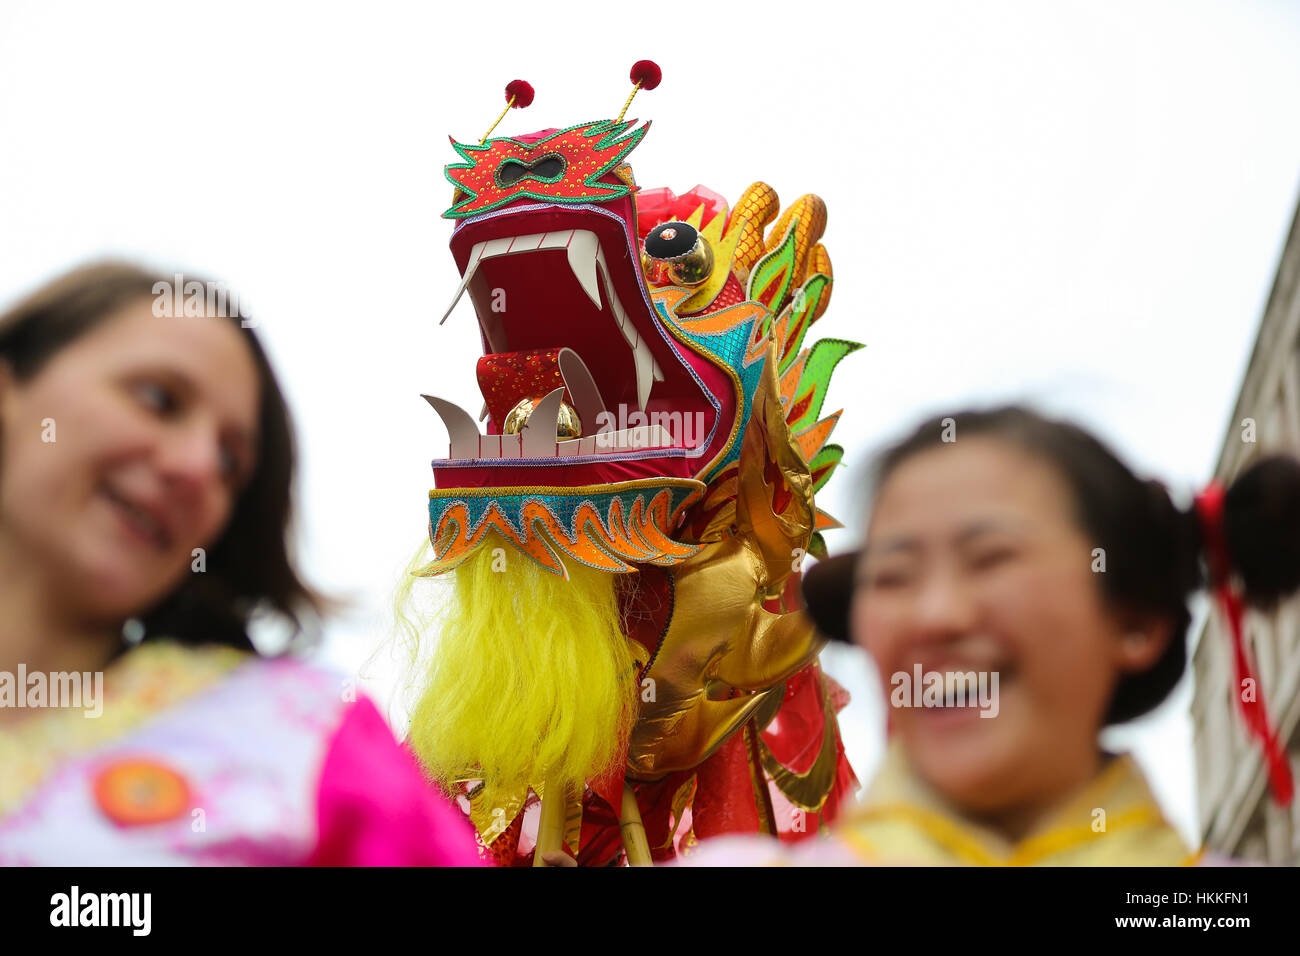 Central London, UK. 29th Jan, 2017. Costumed performers take part in the Chinese New Year Parade in central London, along Charing Cross Road and Chinatown, with further celebrations in Trafalgar Square to celebrate the Year of Rooster, the biggest celebration outside of Asia. The event is organised by London Chinatown Chinese Association. Credit: Dinendra Haria/Alamy Live News Stock Photo